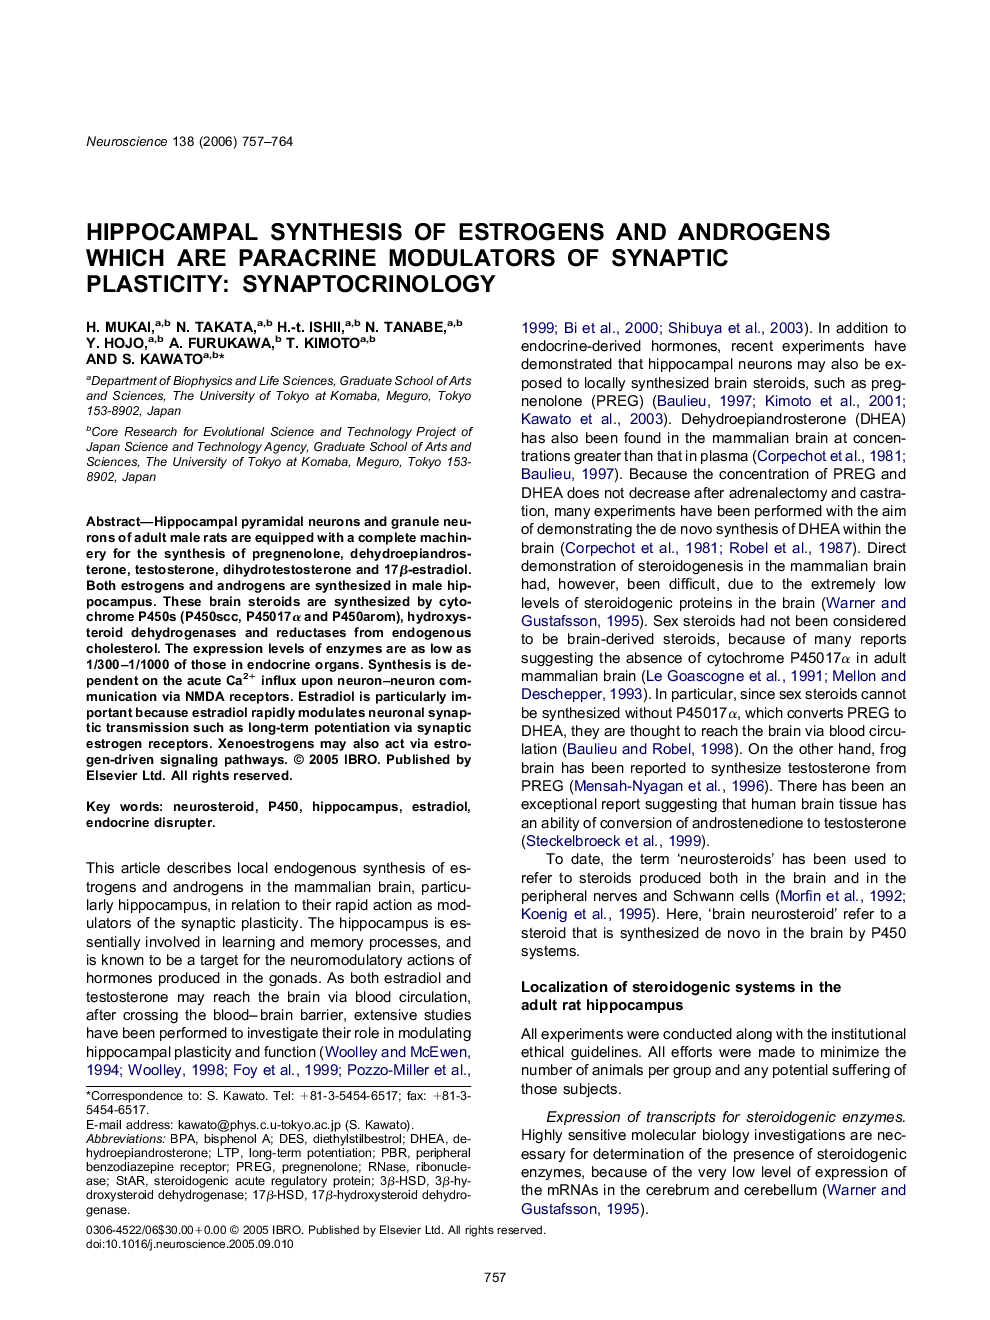 Hippocampal synthesis of estrogens and androgens which are paracrine modulators of synaptic plasticity: Synaptocrinology